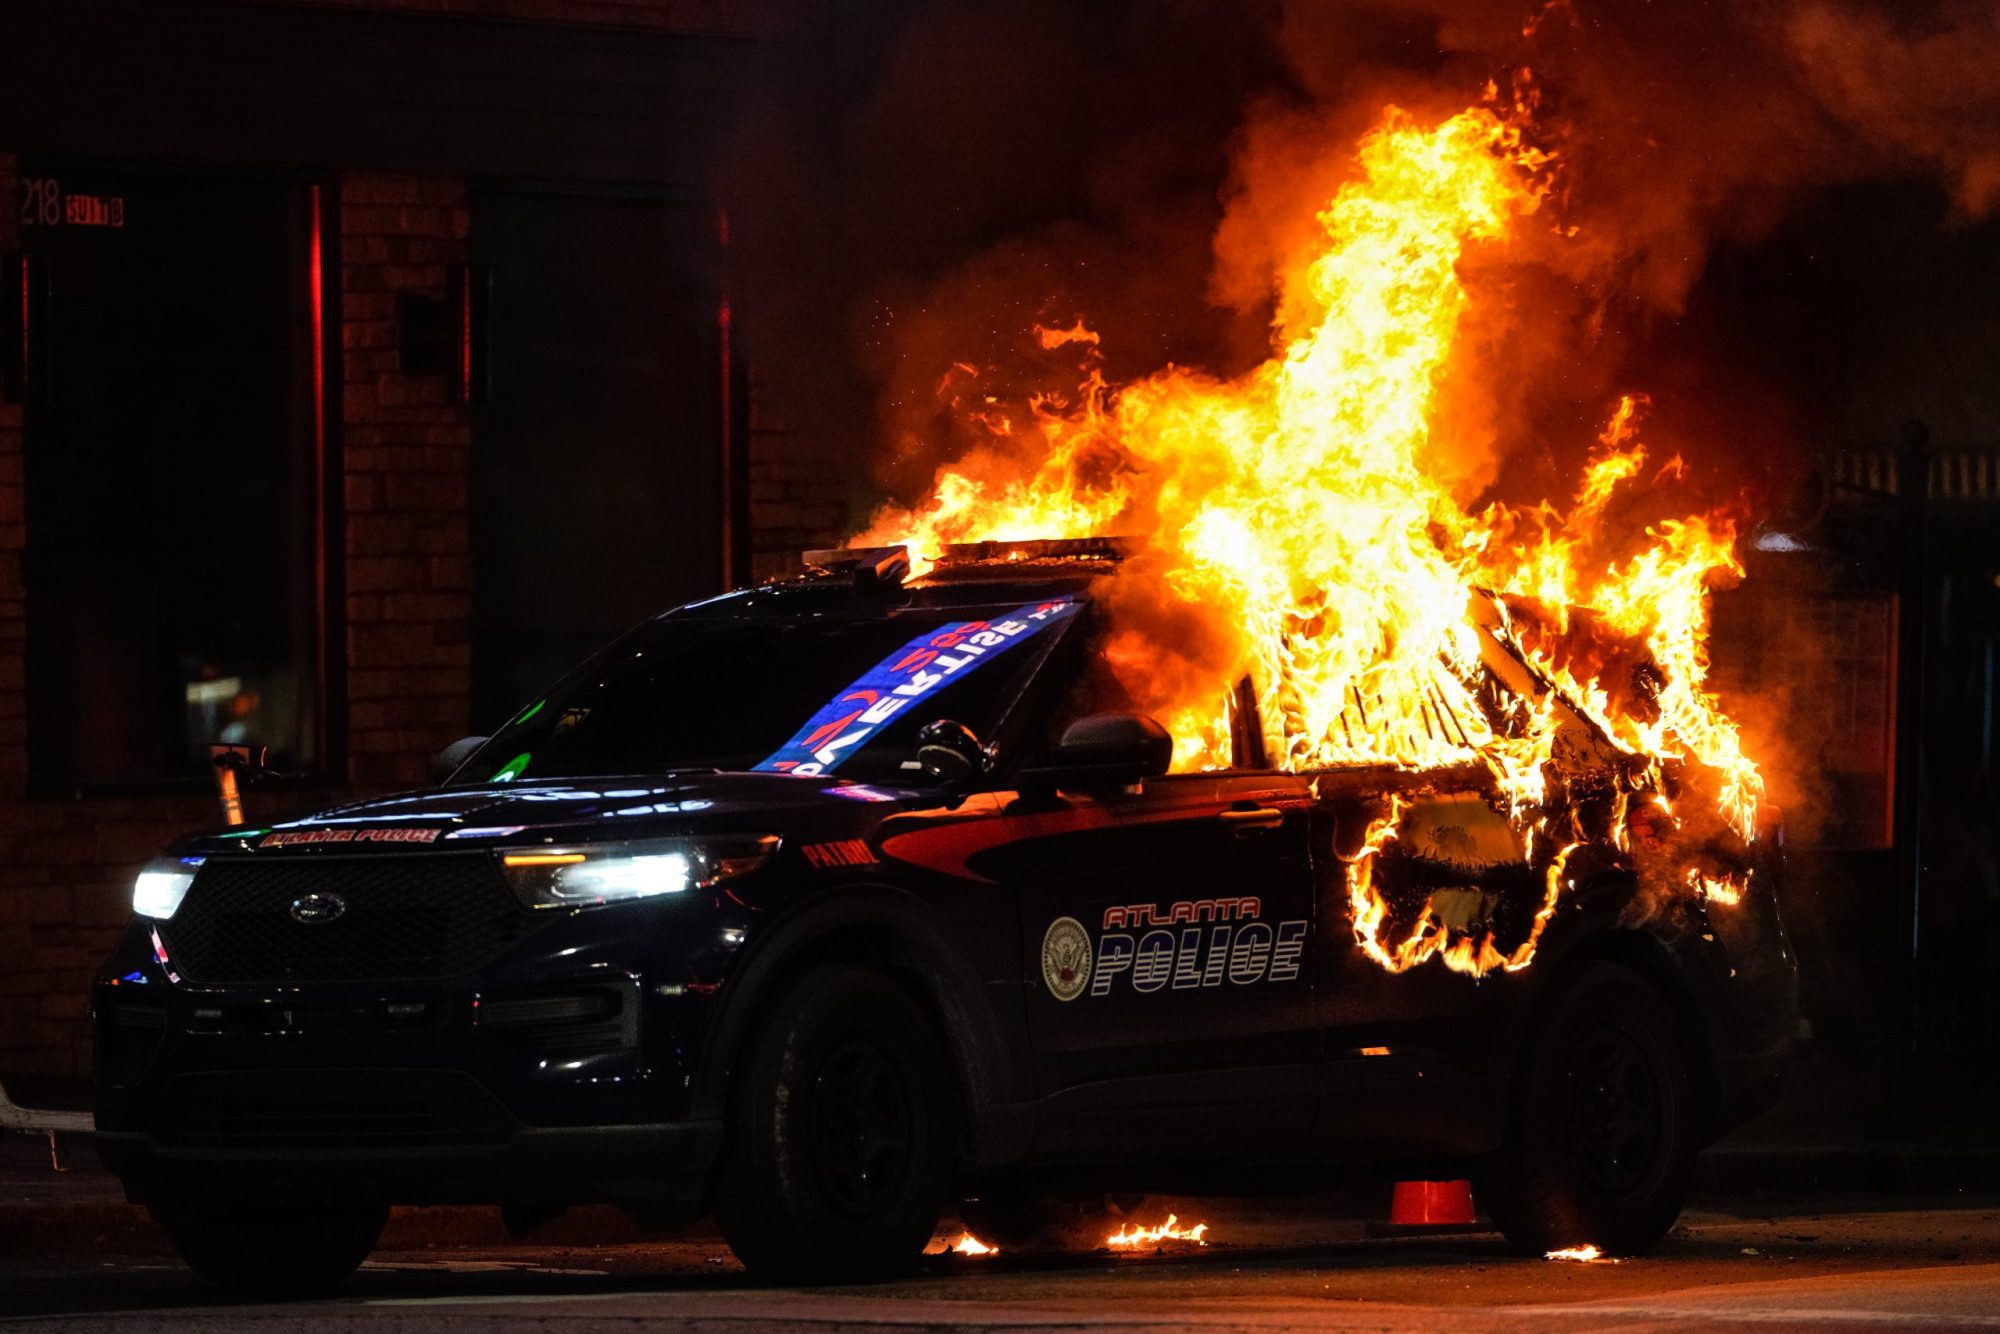 An Atlanta police vehicle is set on fire during a "Stop cop city" protest in Atlanta, Georgia, United States on January 21, 2023. Photo by Benjamin Hendren/Anadolu Agency via Getty Images